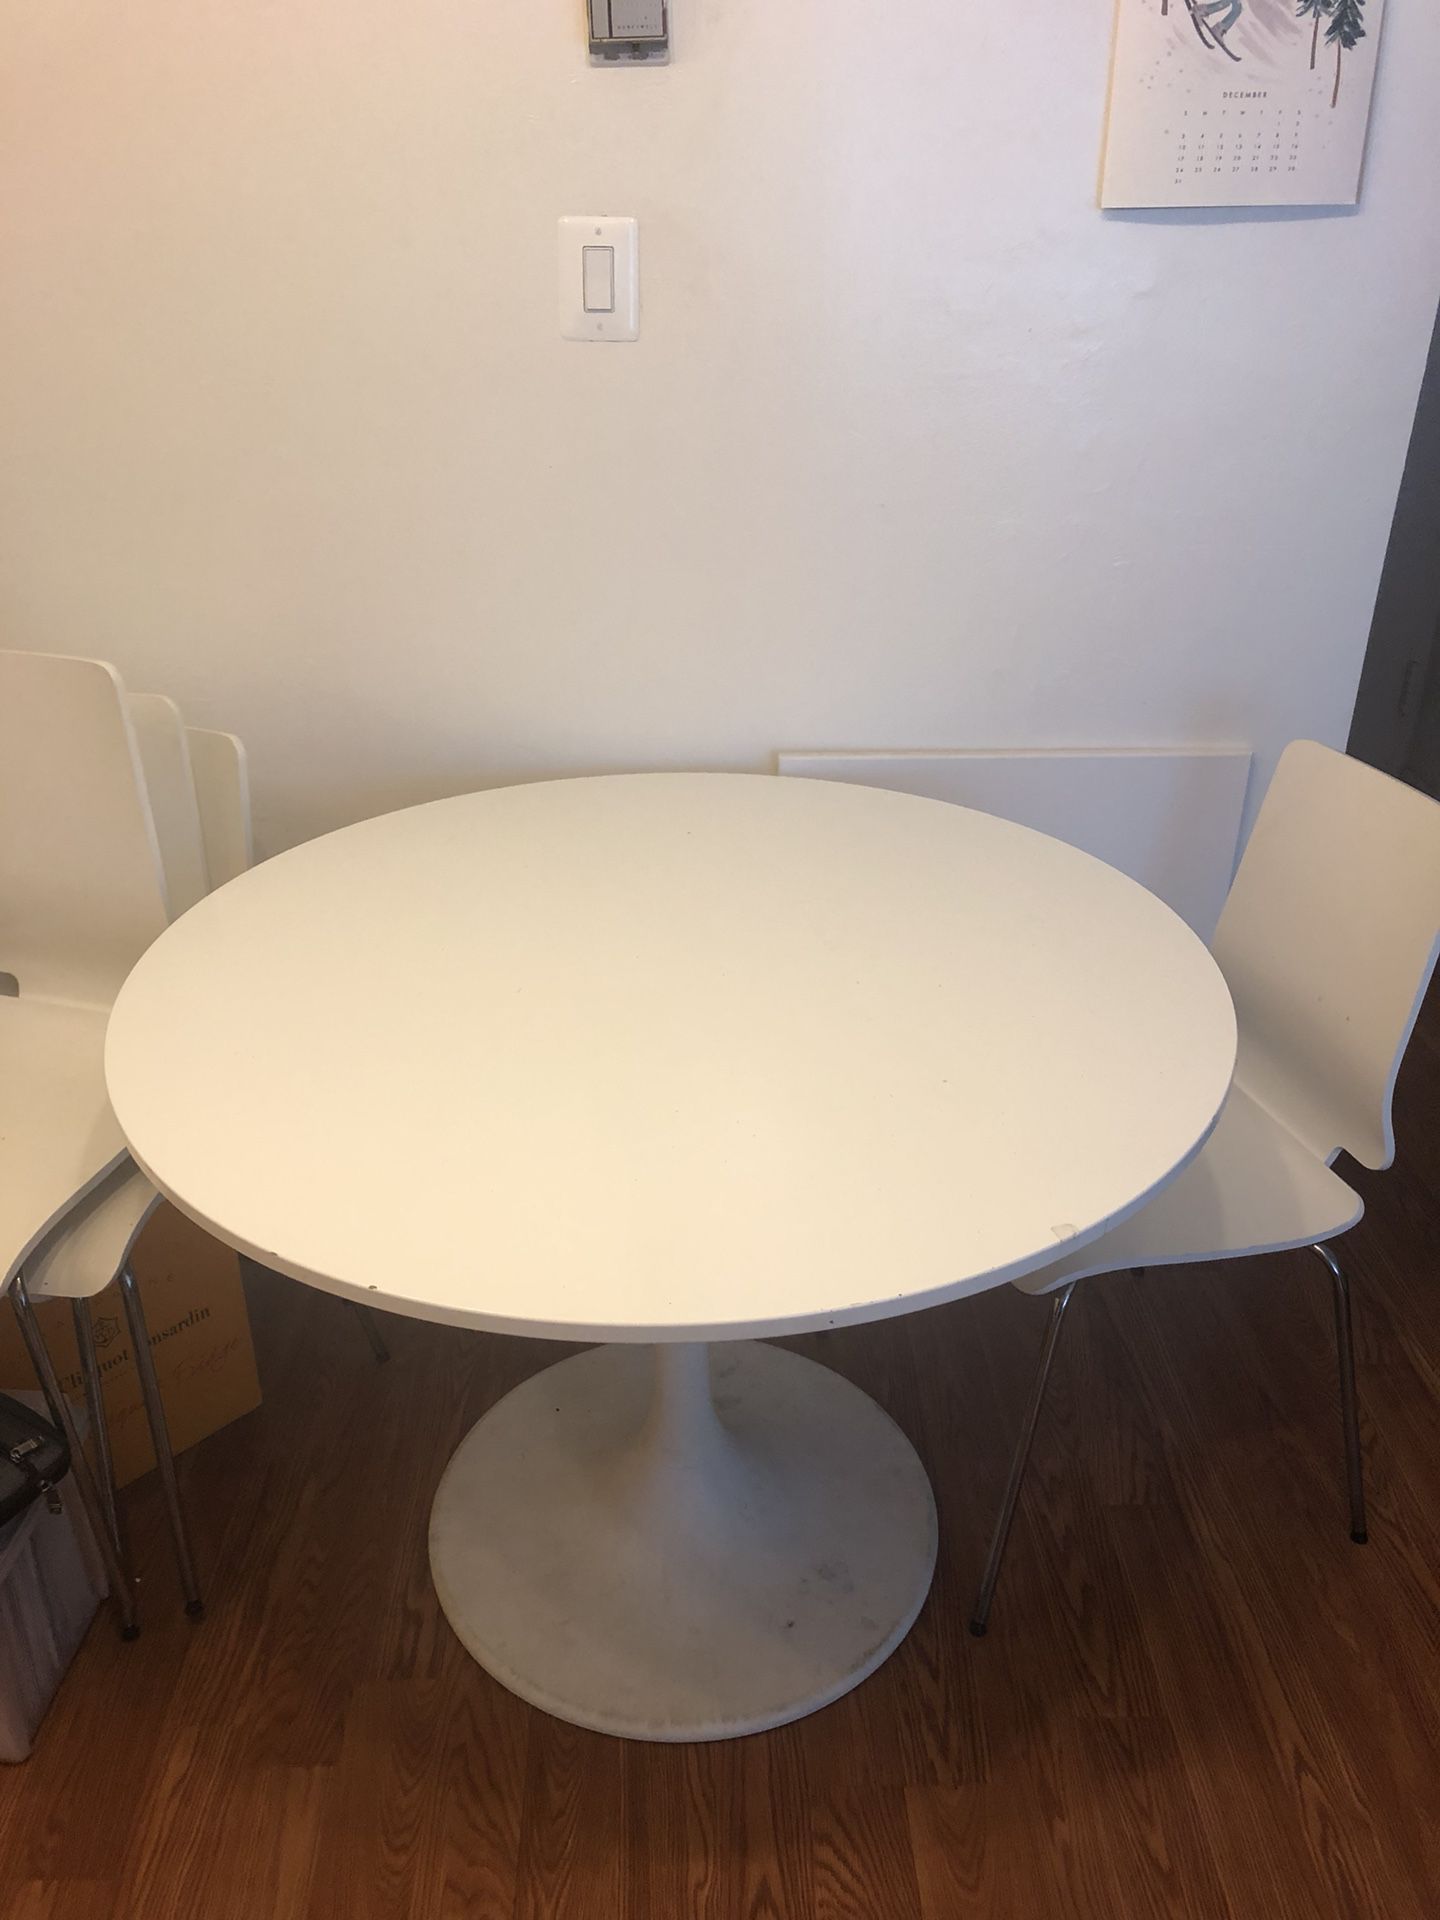 FREE! IKEA table and chair